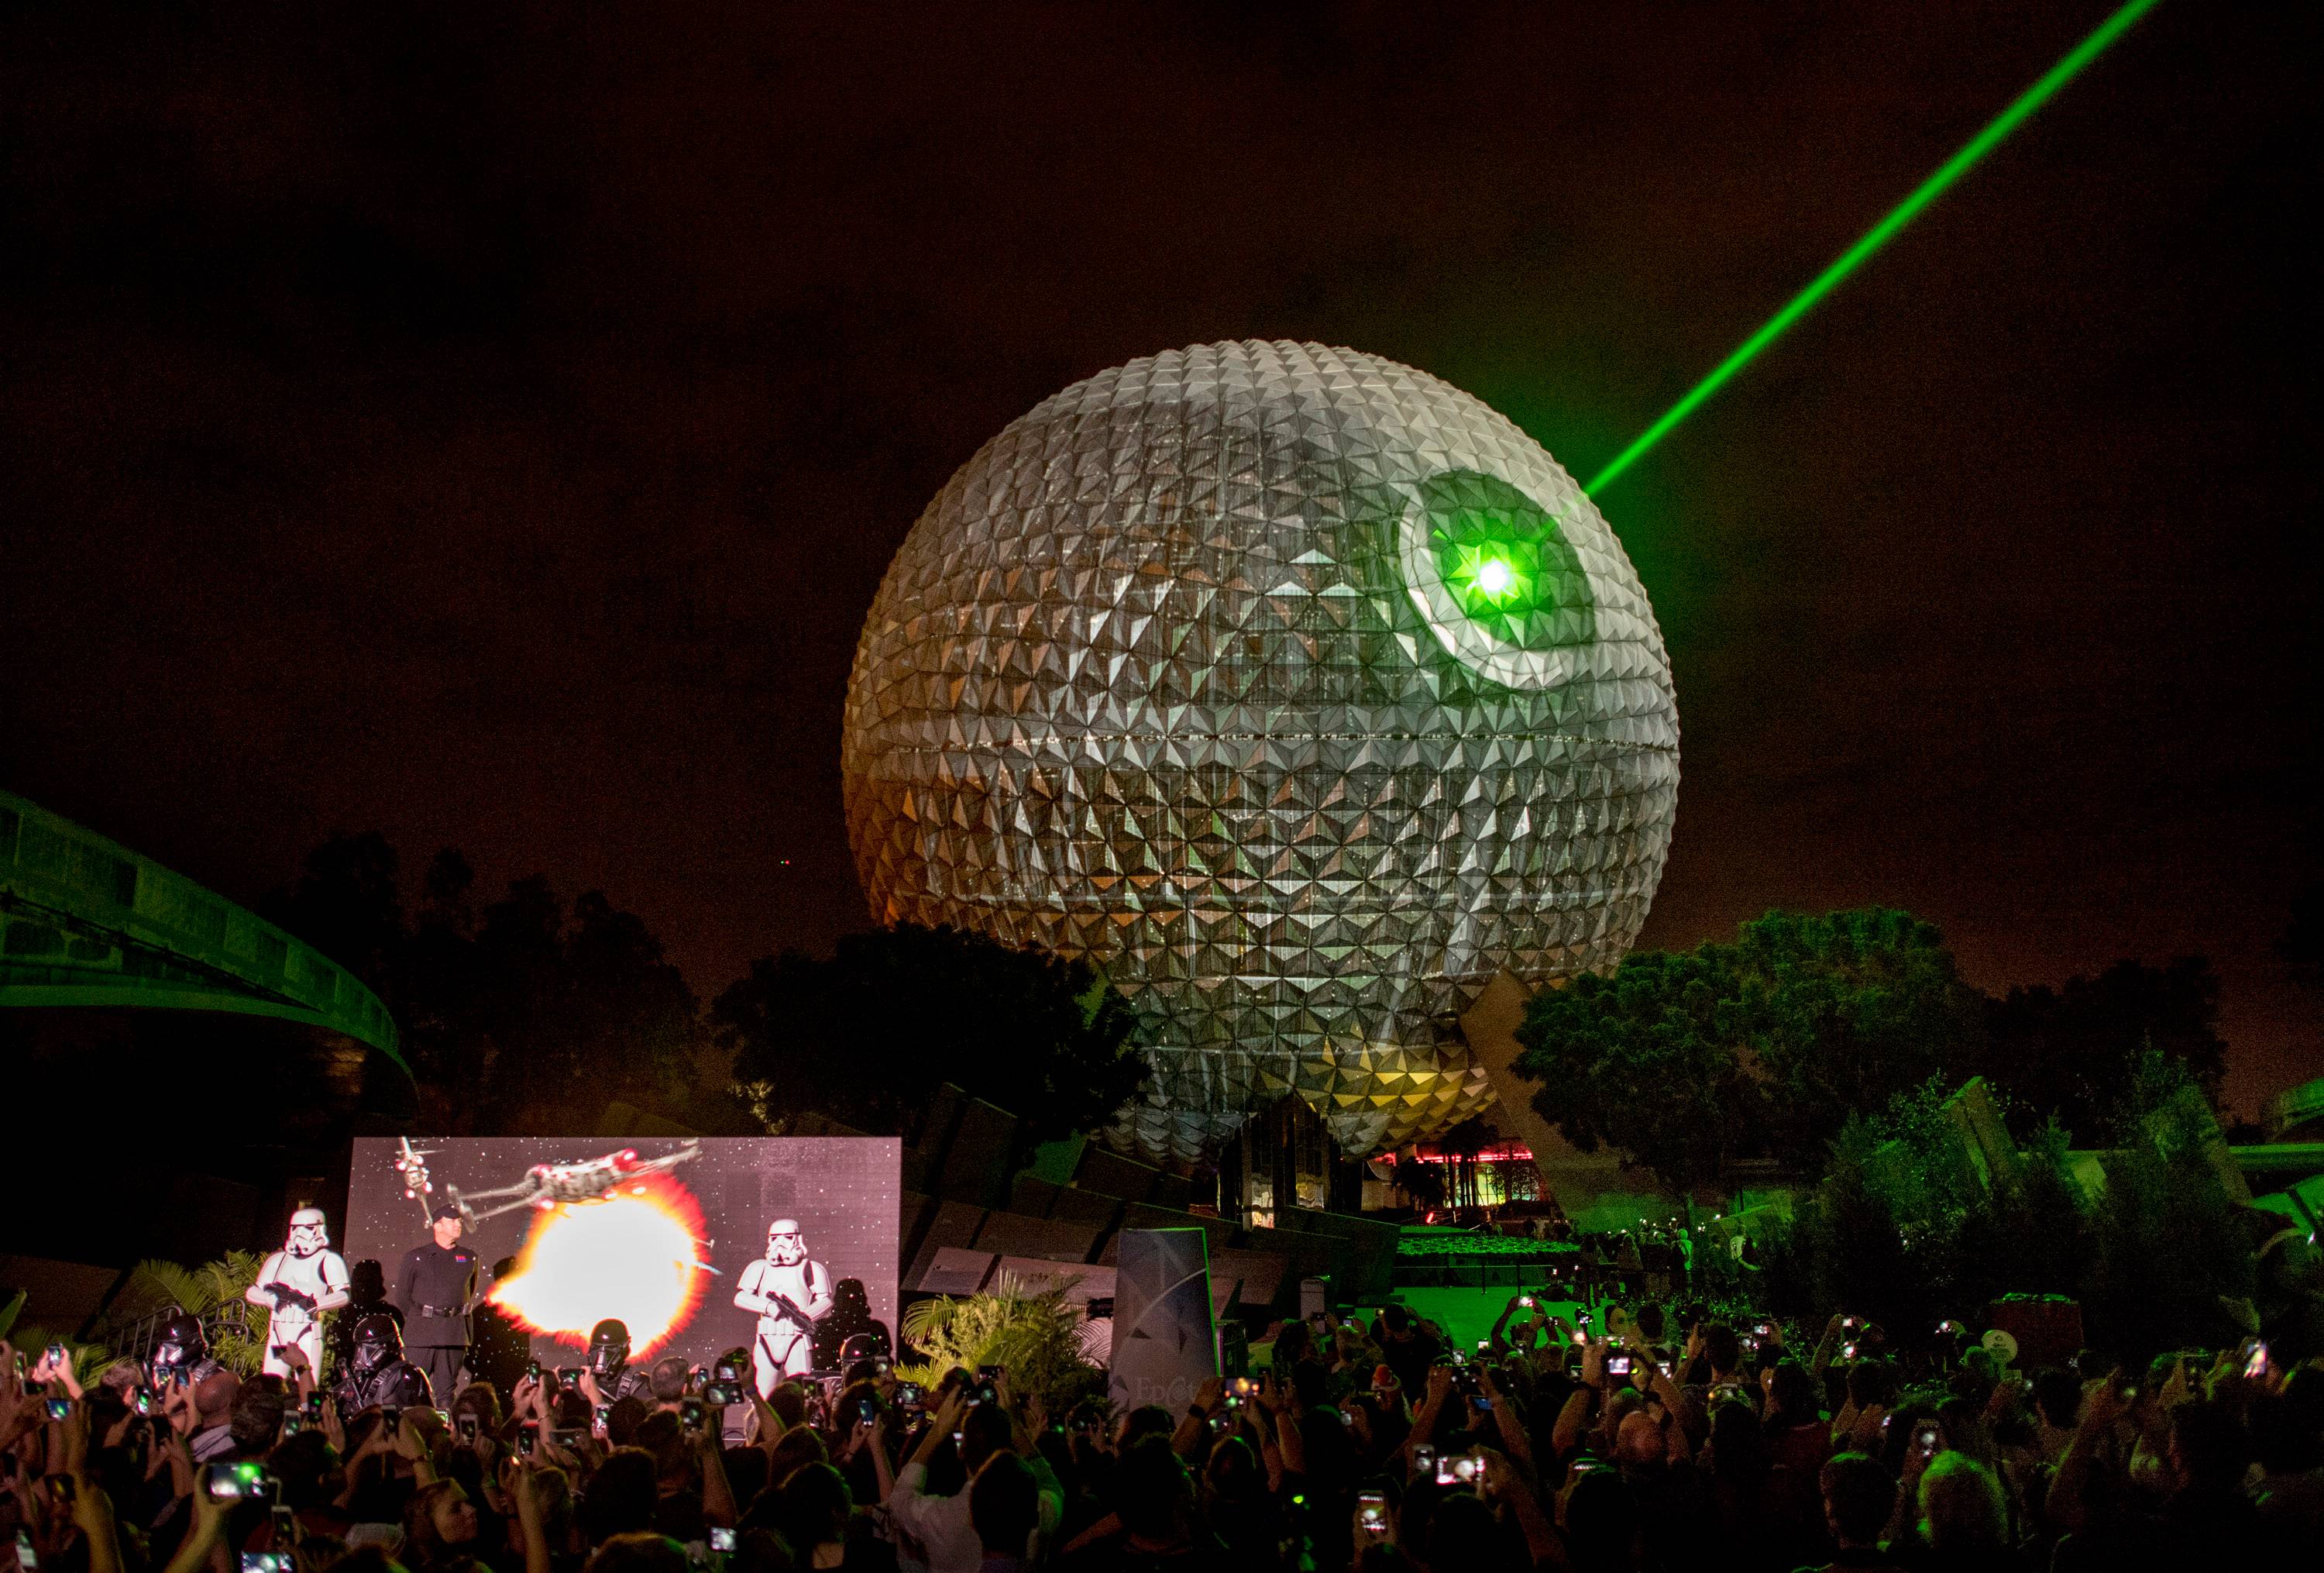 Spaceship Earth transforms into the Death Star